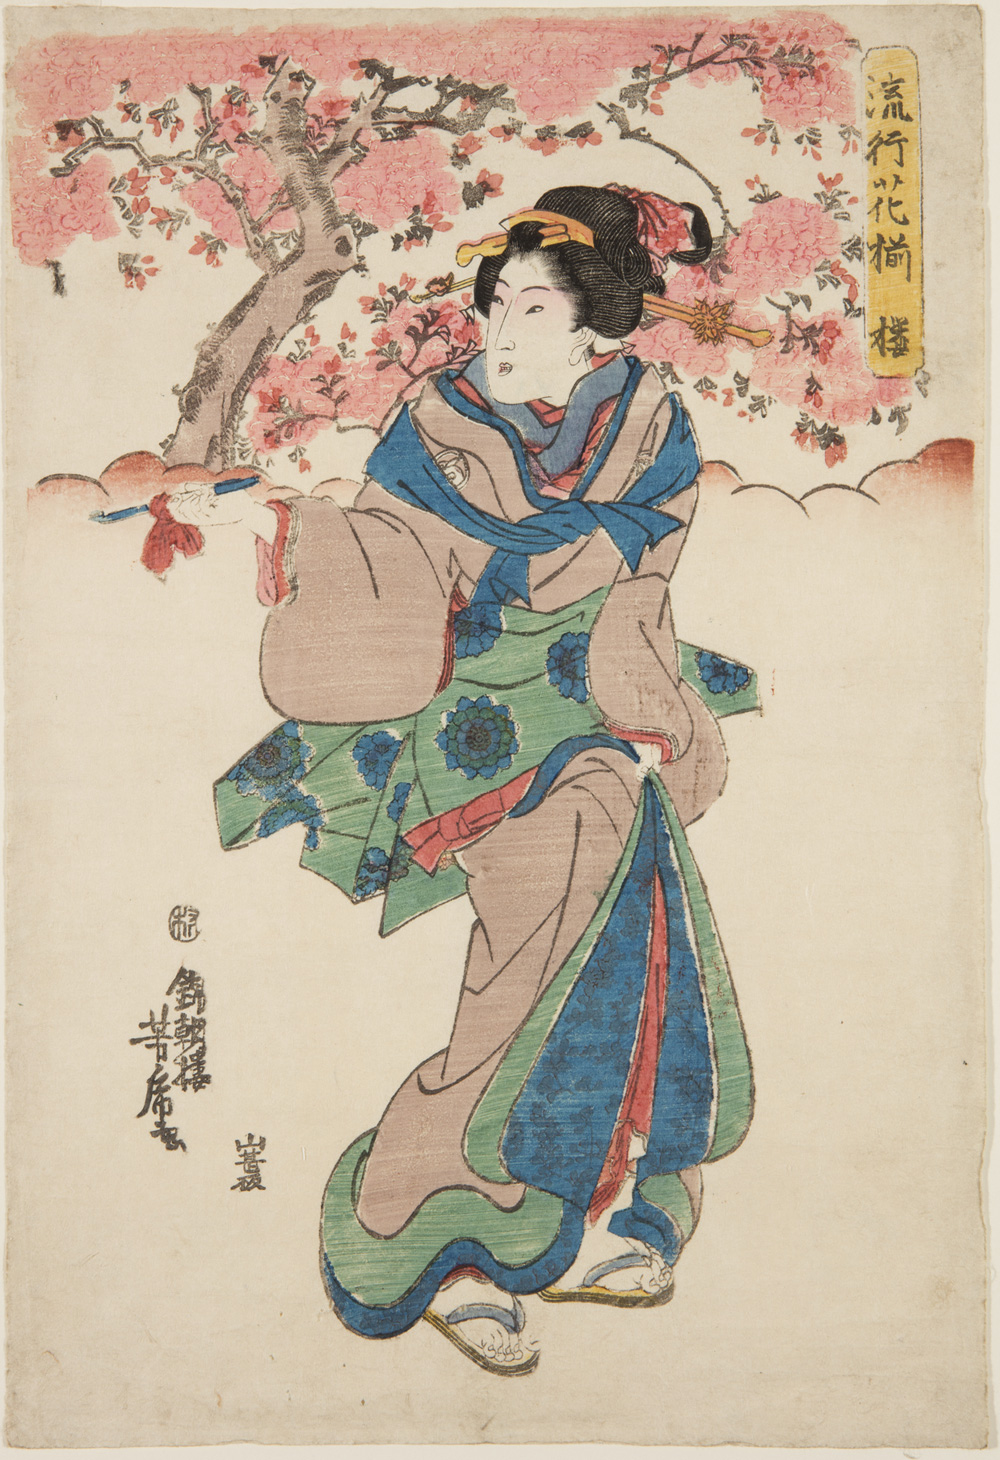 Japanese print of a person dressed in elaborate traditional clothes walking among the cherry blossom.